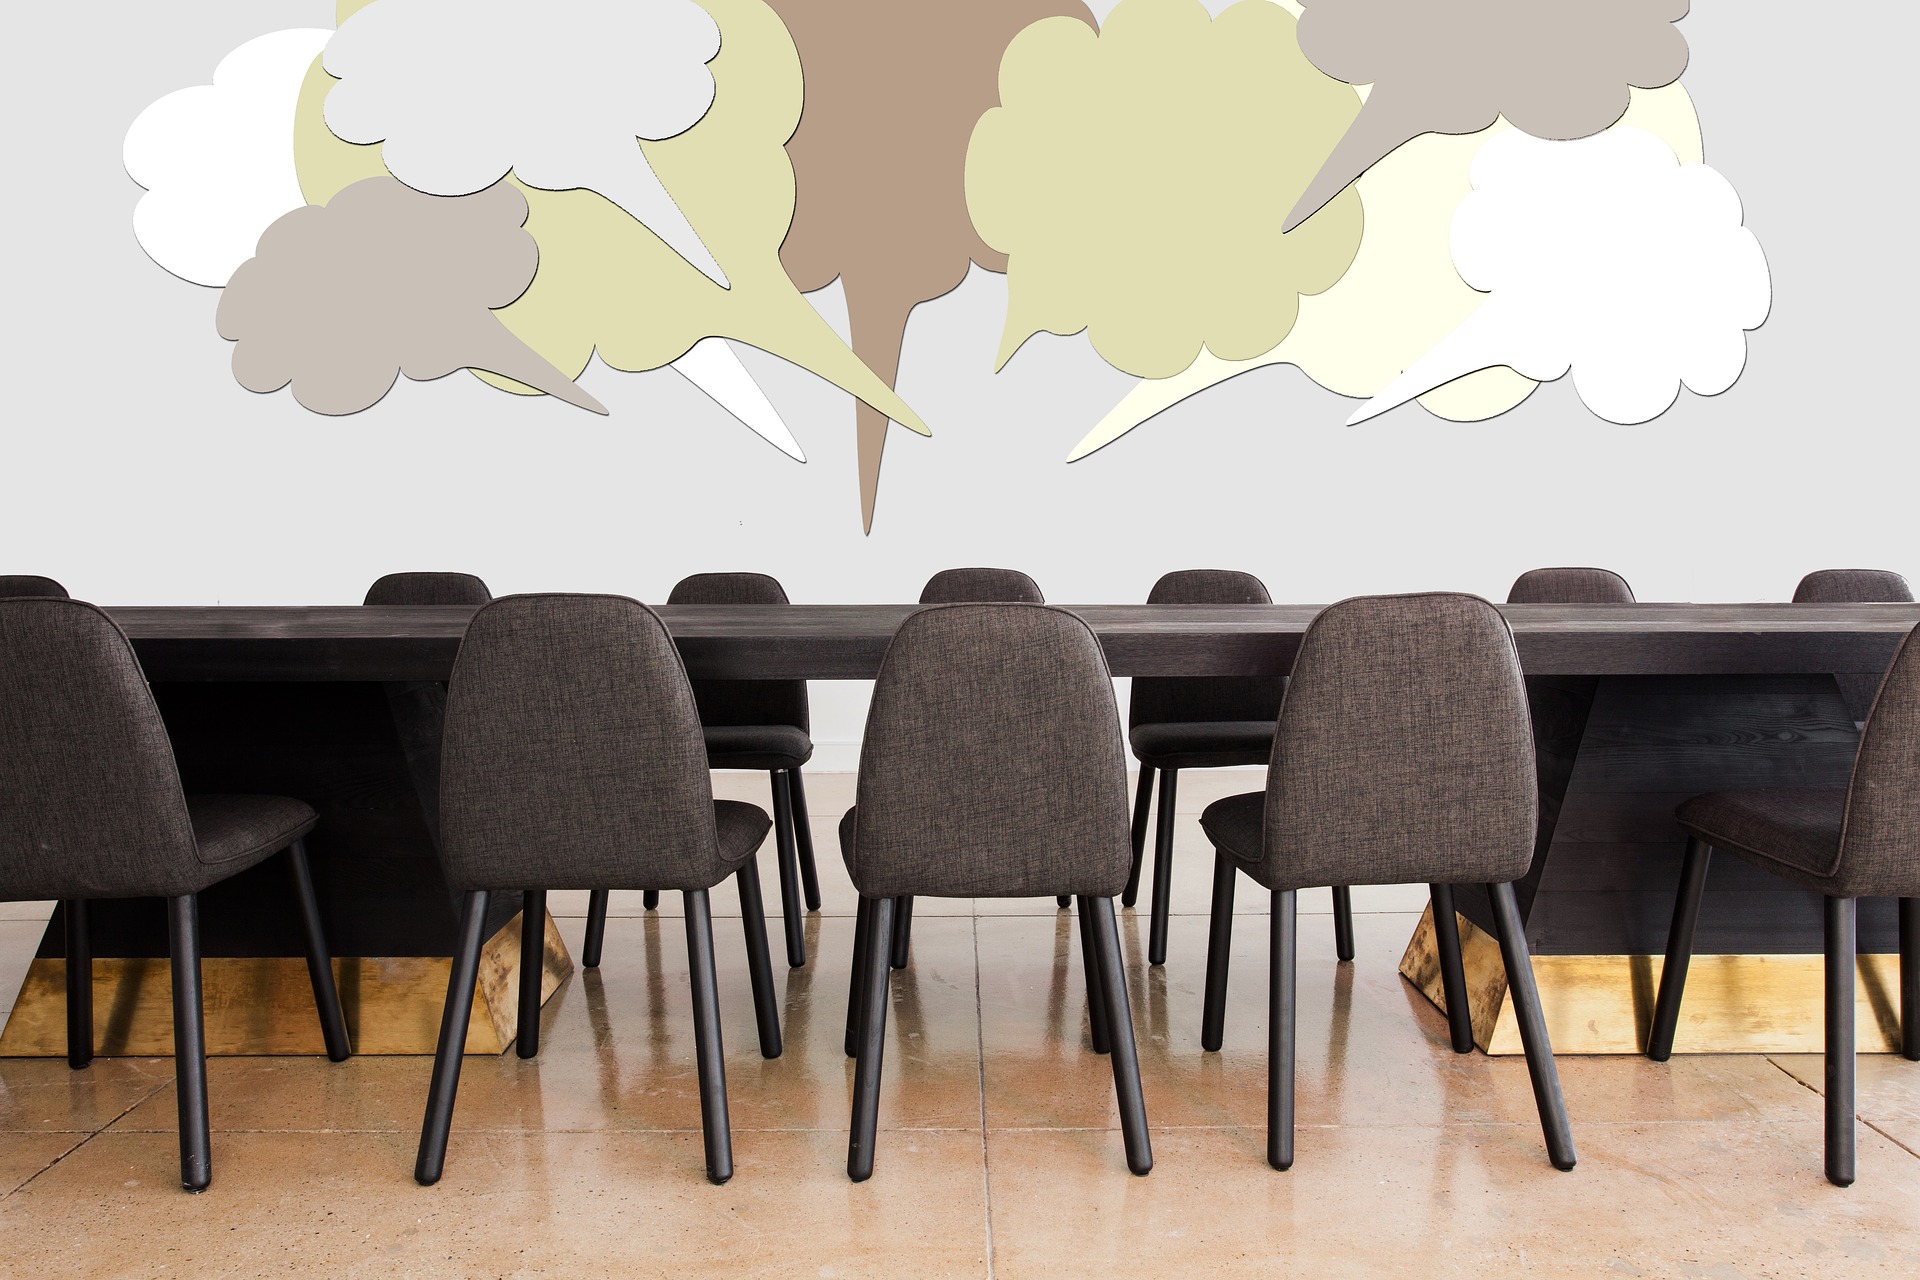 Conference table and chairs with speech bubbles.